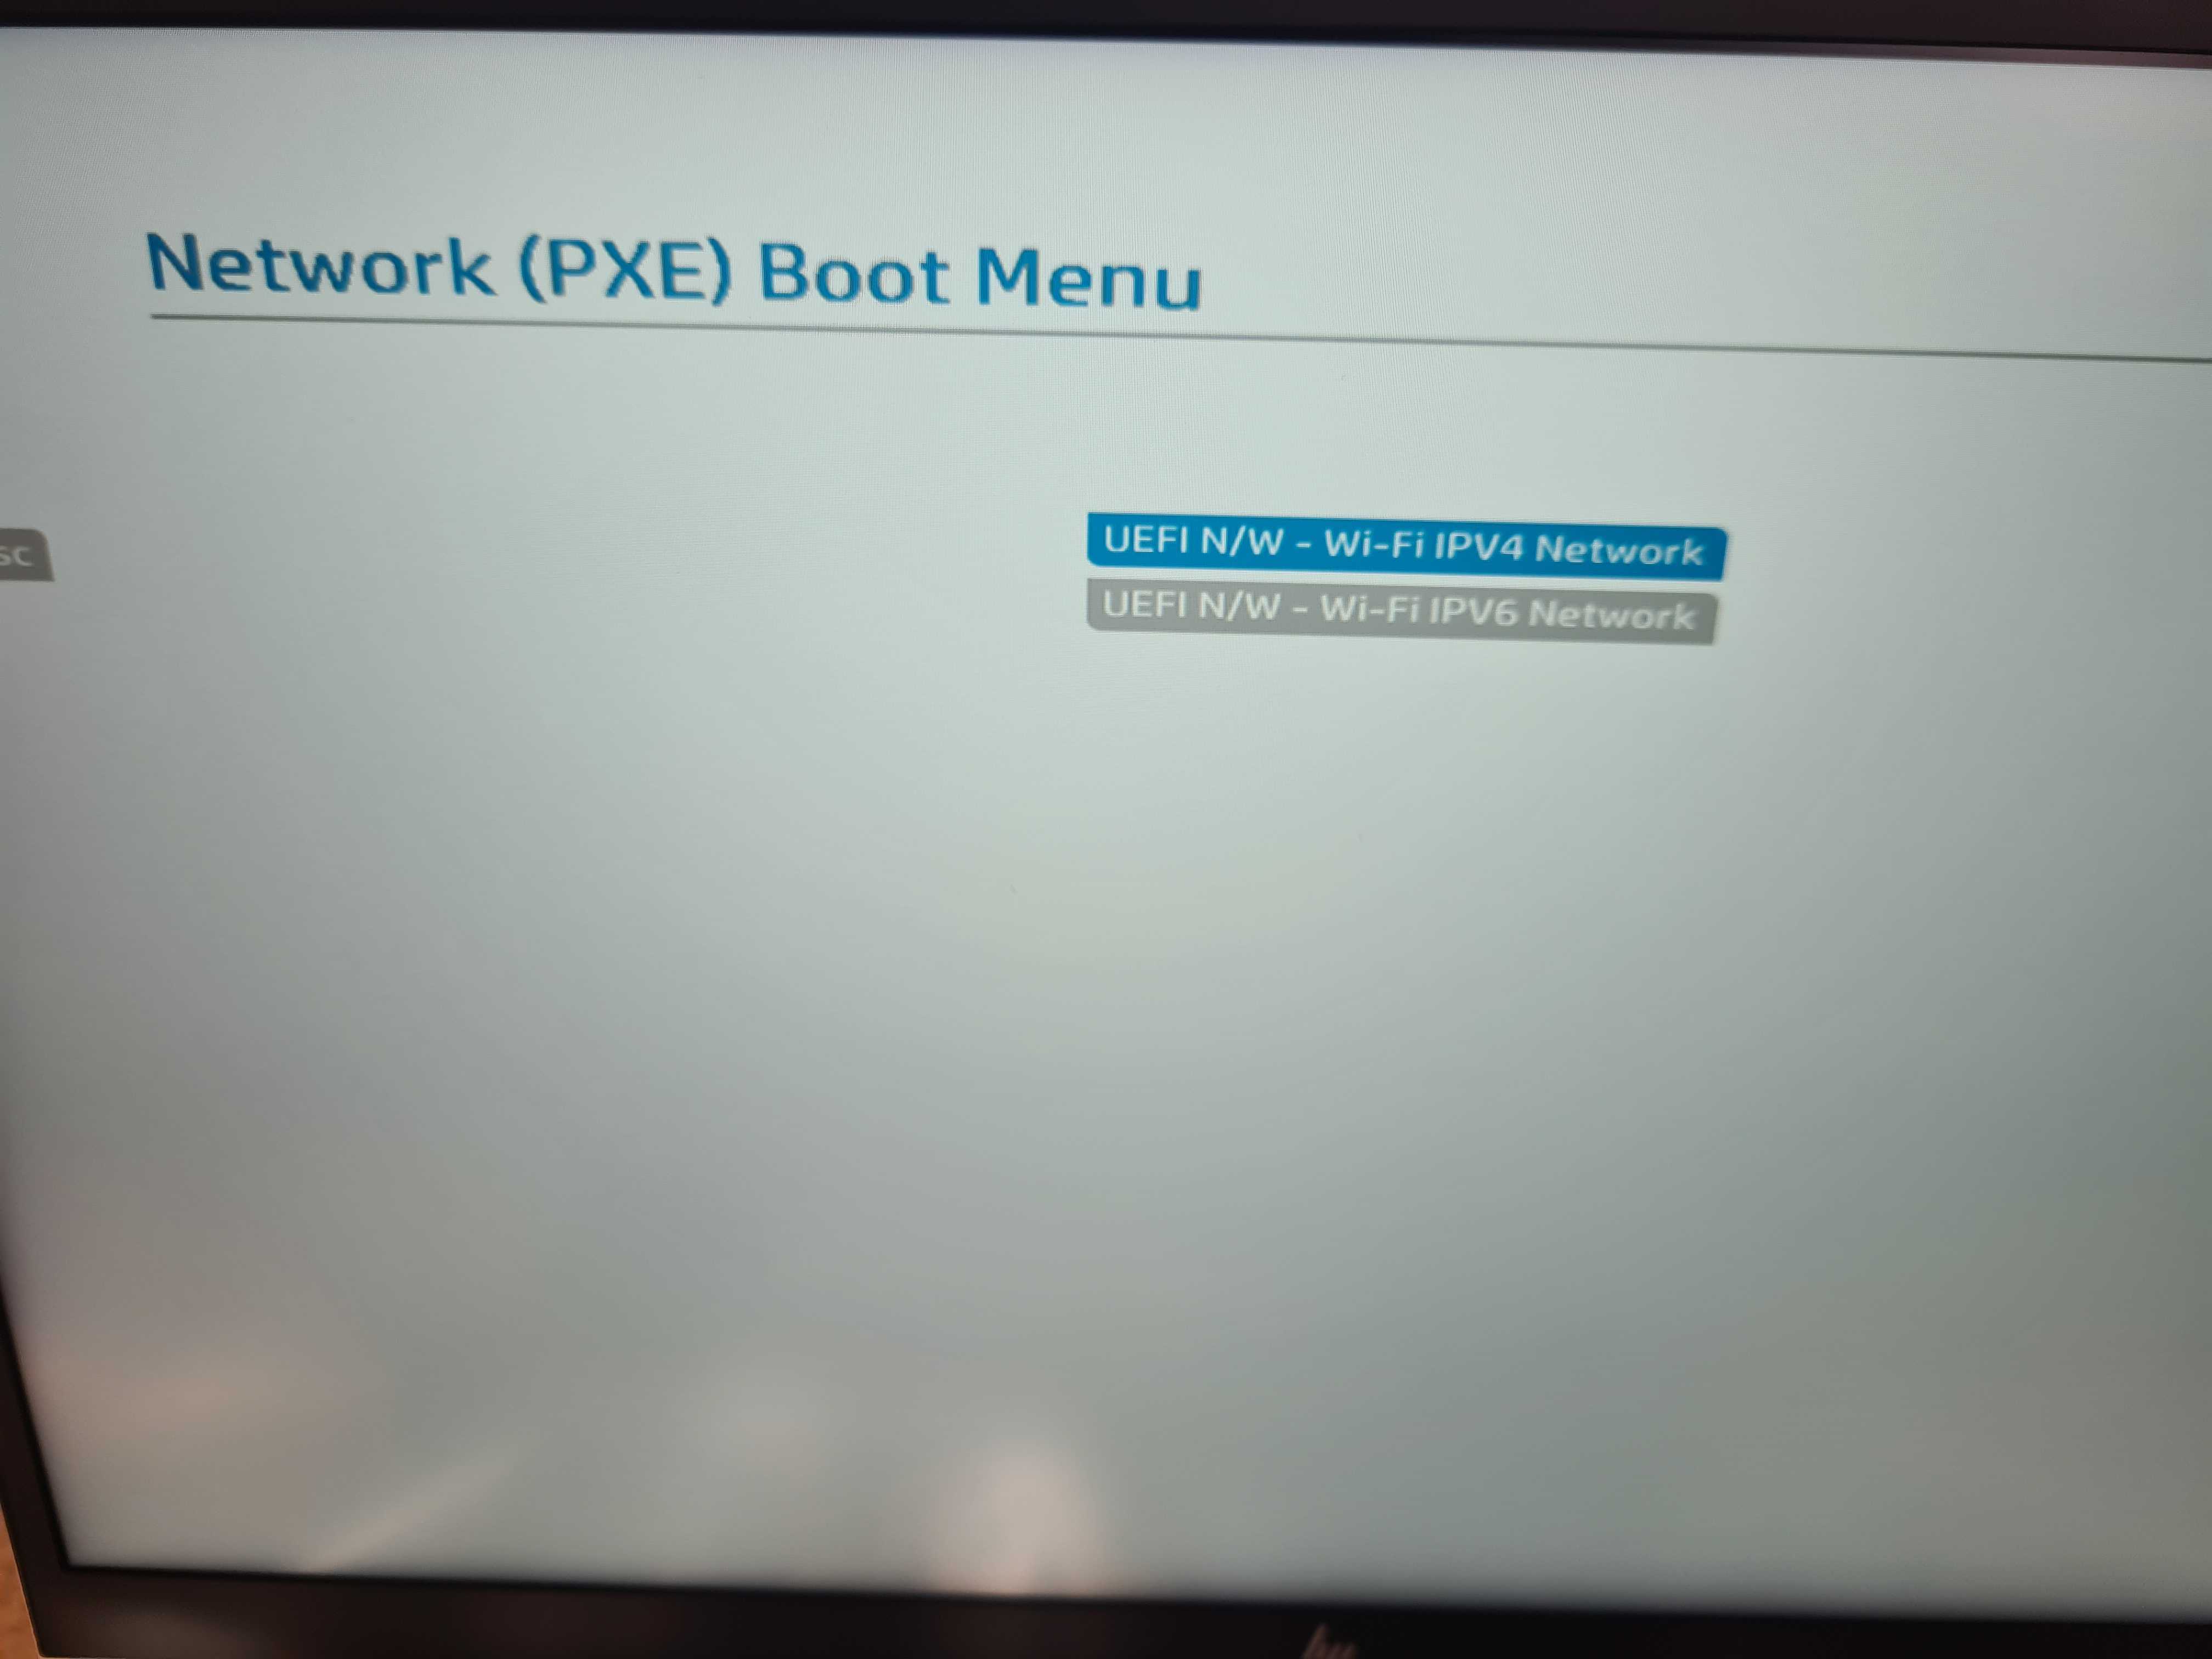 HP 840 g7 Network PXE over WiFi - HP Support Community - 7843458